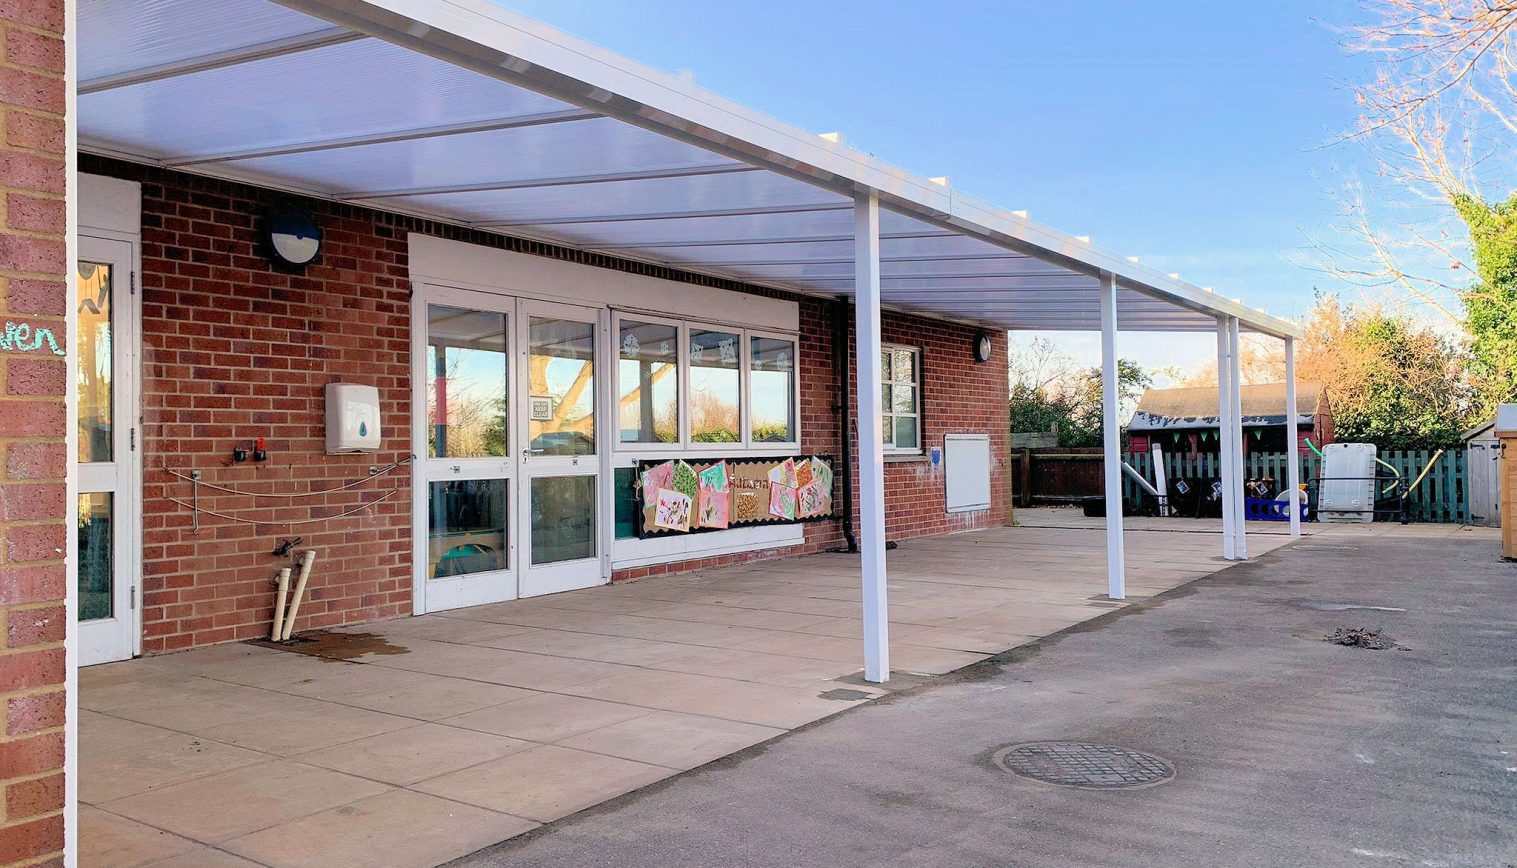 Cliff Lane Primary School – Wall Mounted Canopy